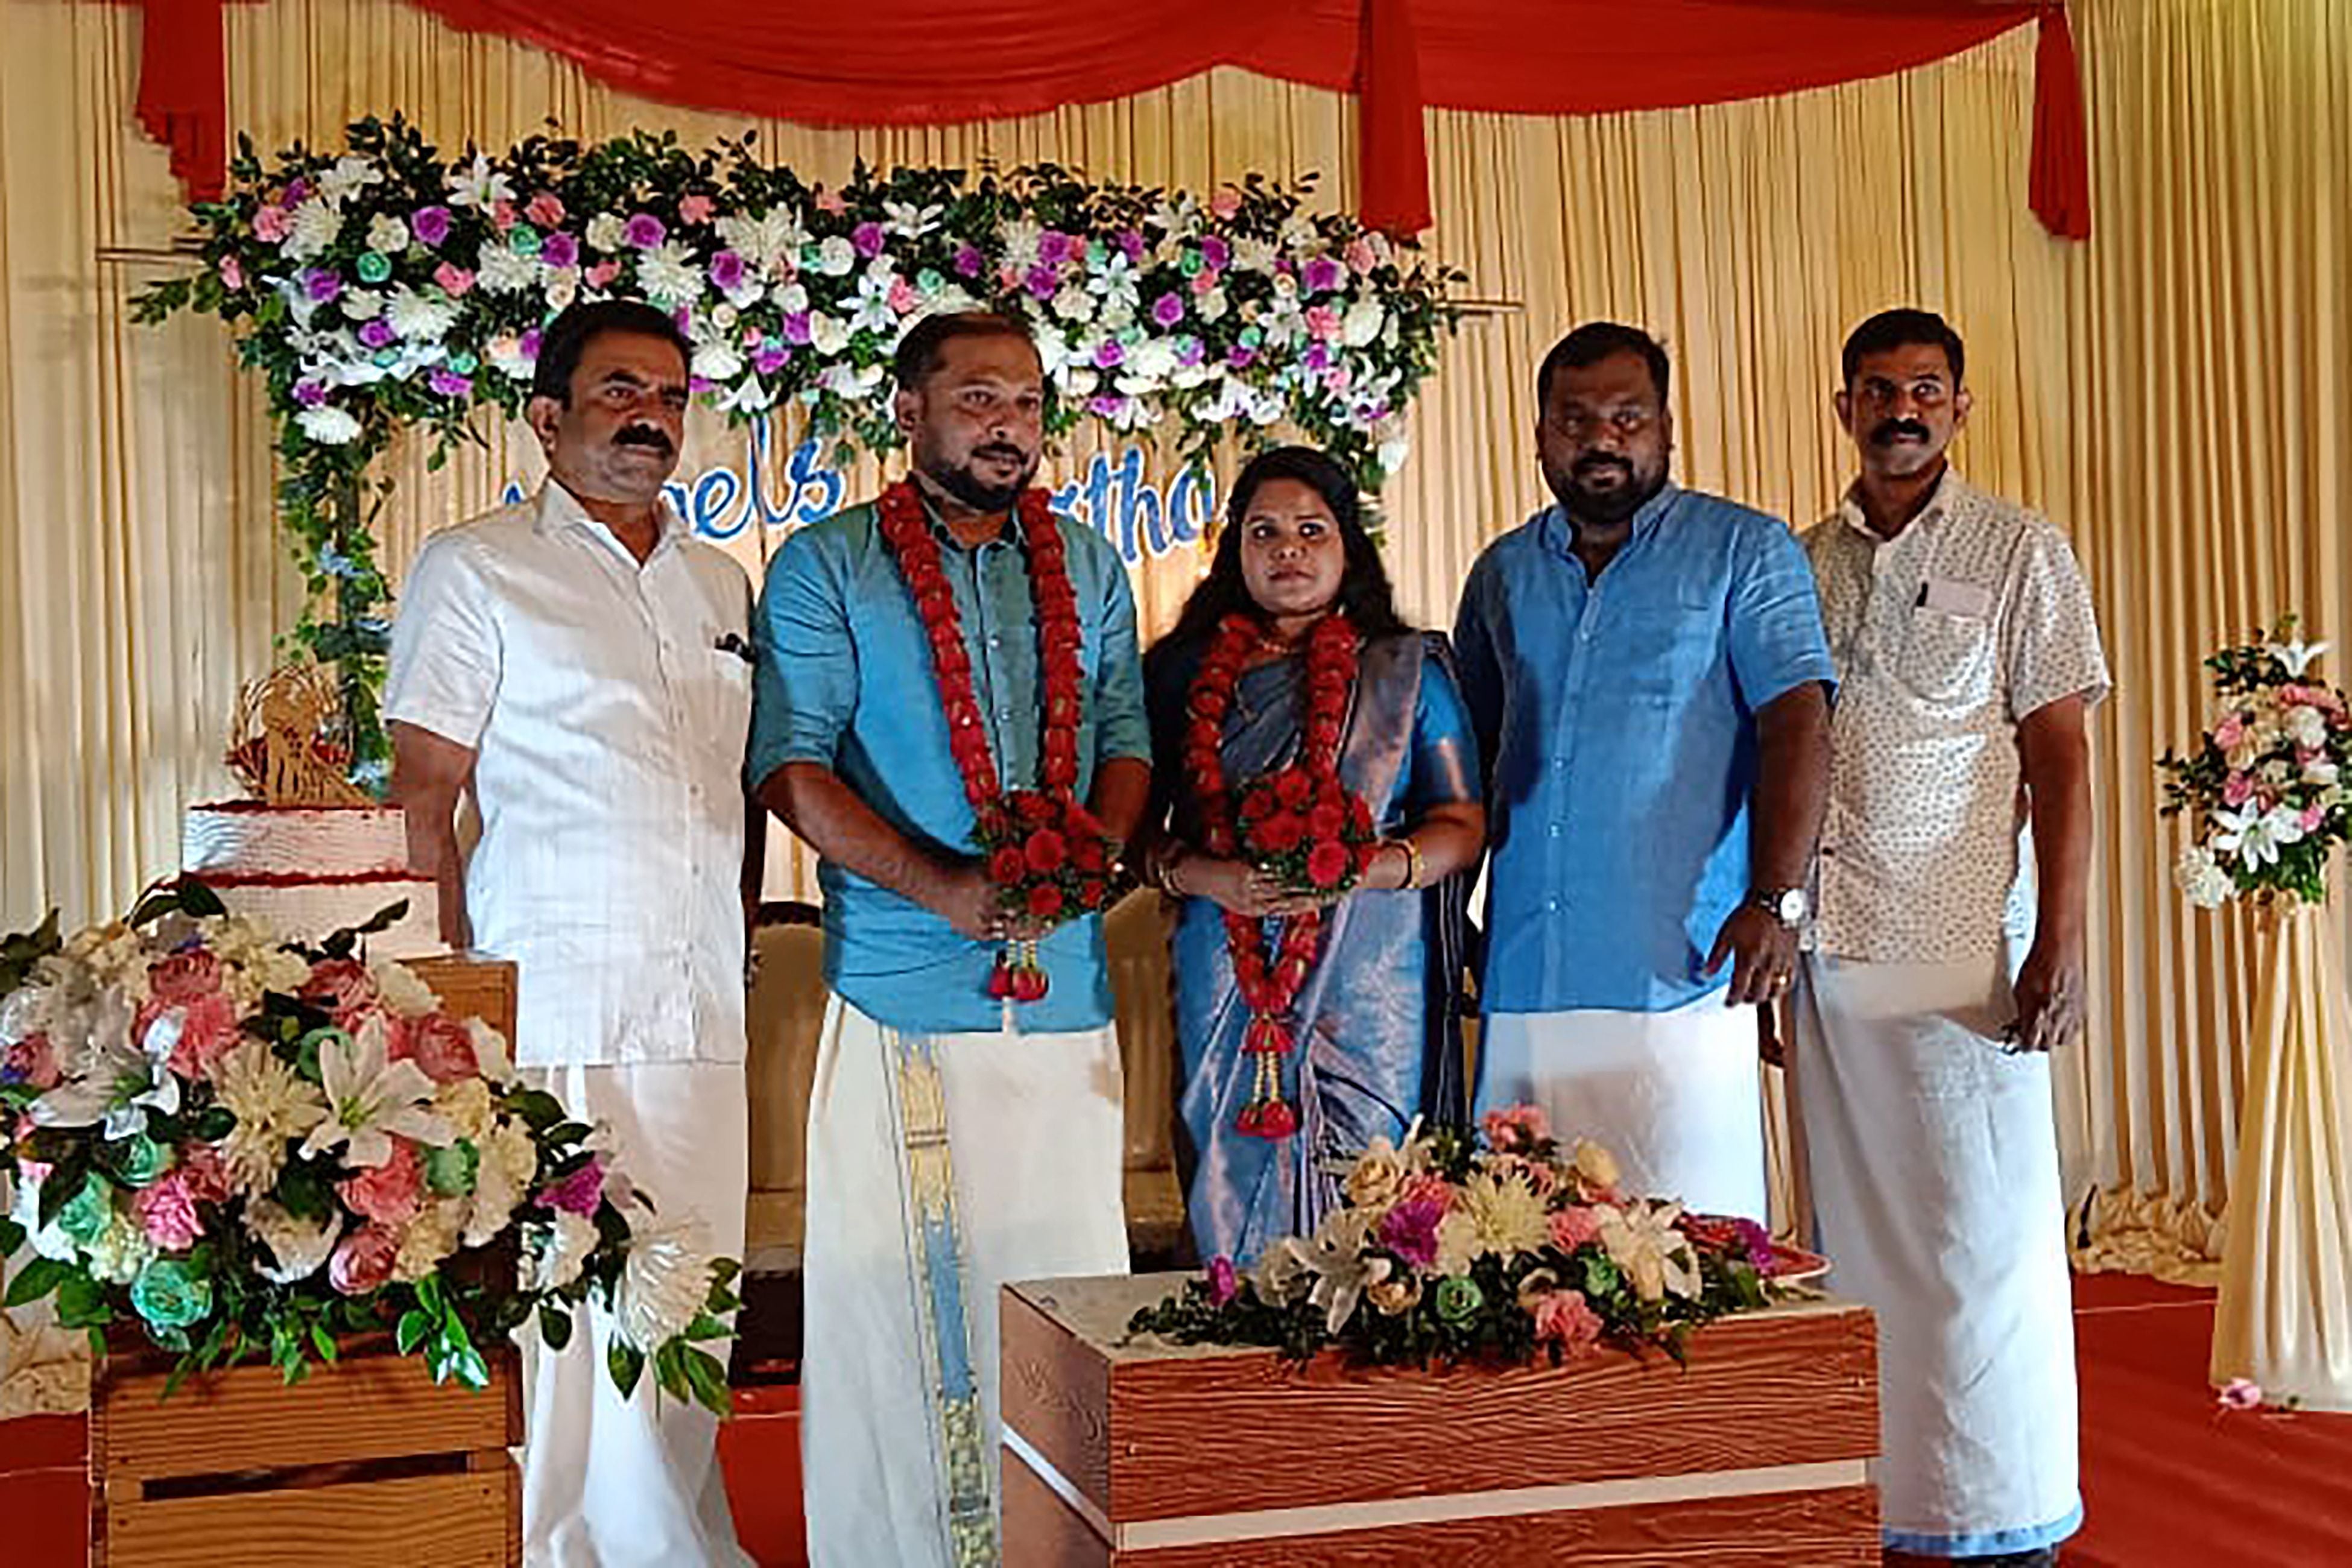 From left: Marx joins the groom, Engels, the bride, Bismitha, Lenin and Ho Chi Minh for a group photo during the wedding in Athirappilly, Kerala